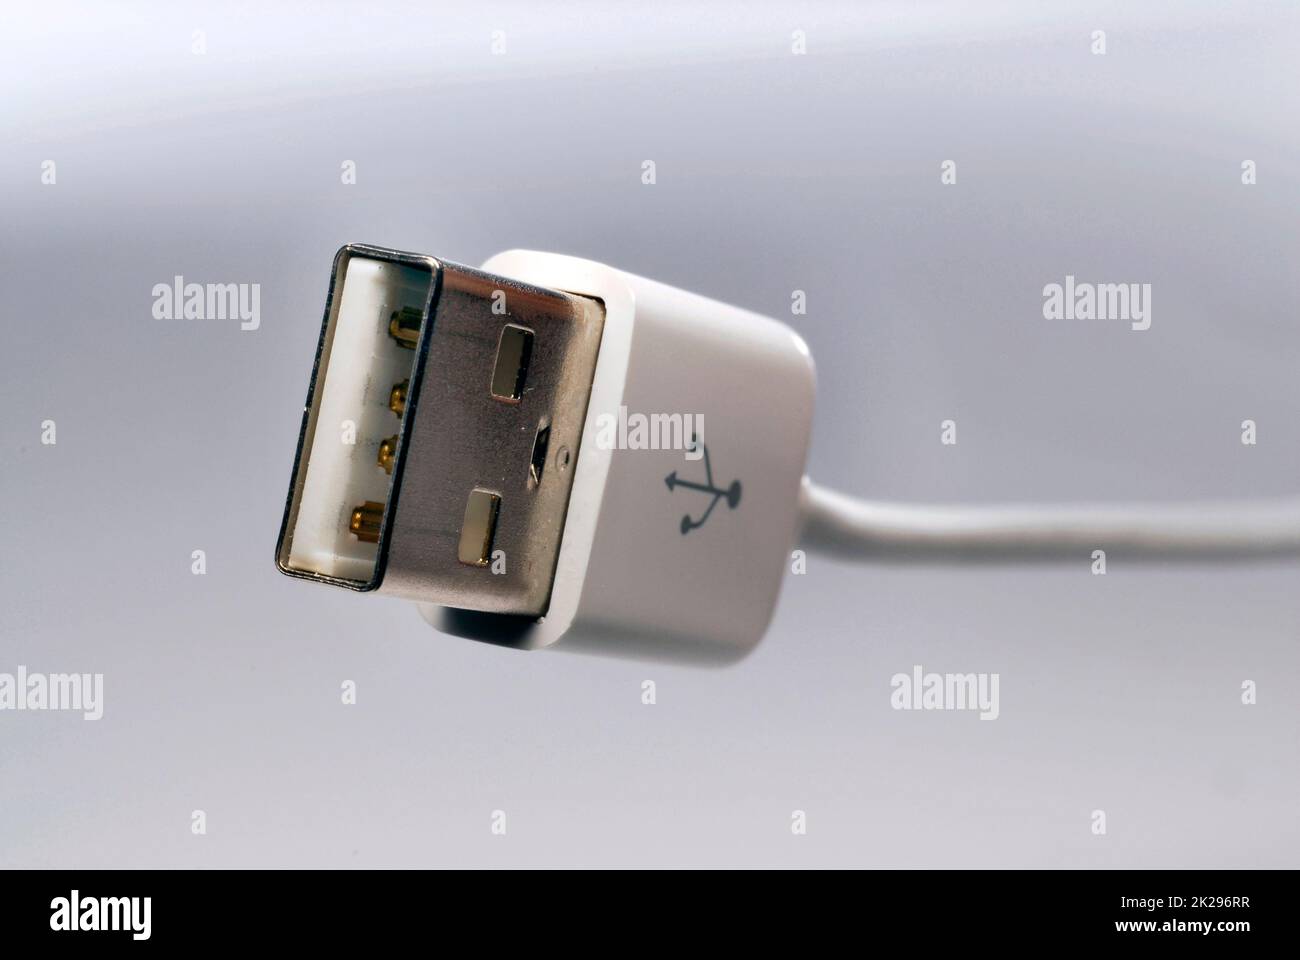 Macro shot of a USB connector in a communication device Stock Photo